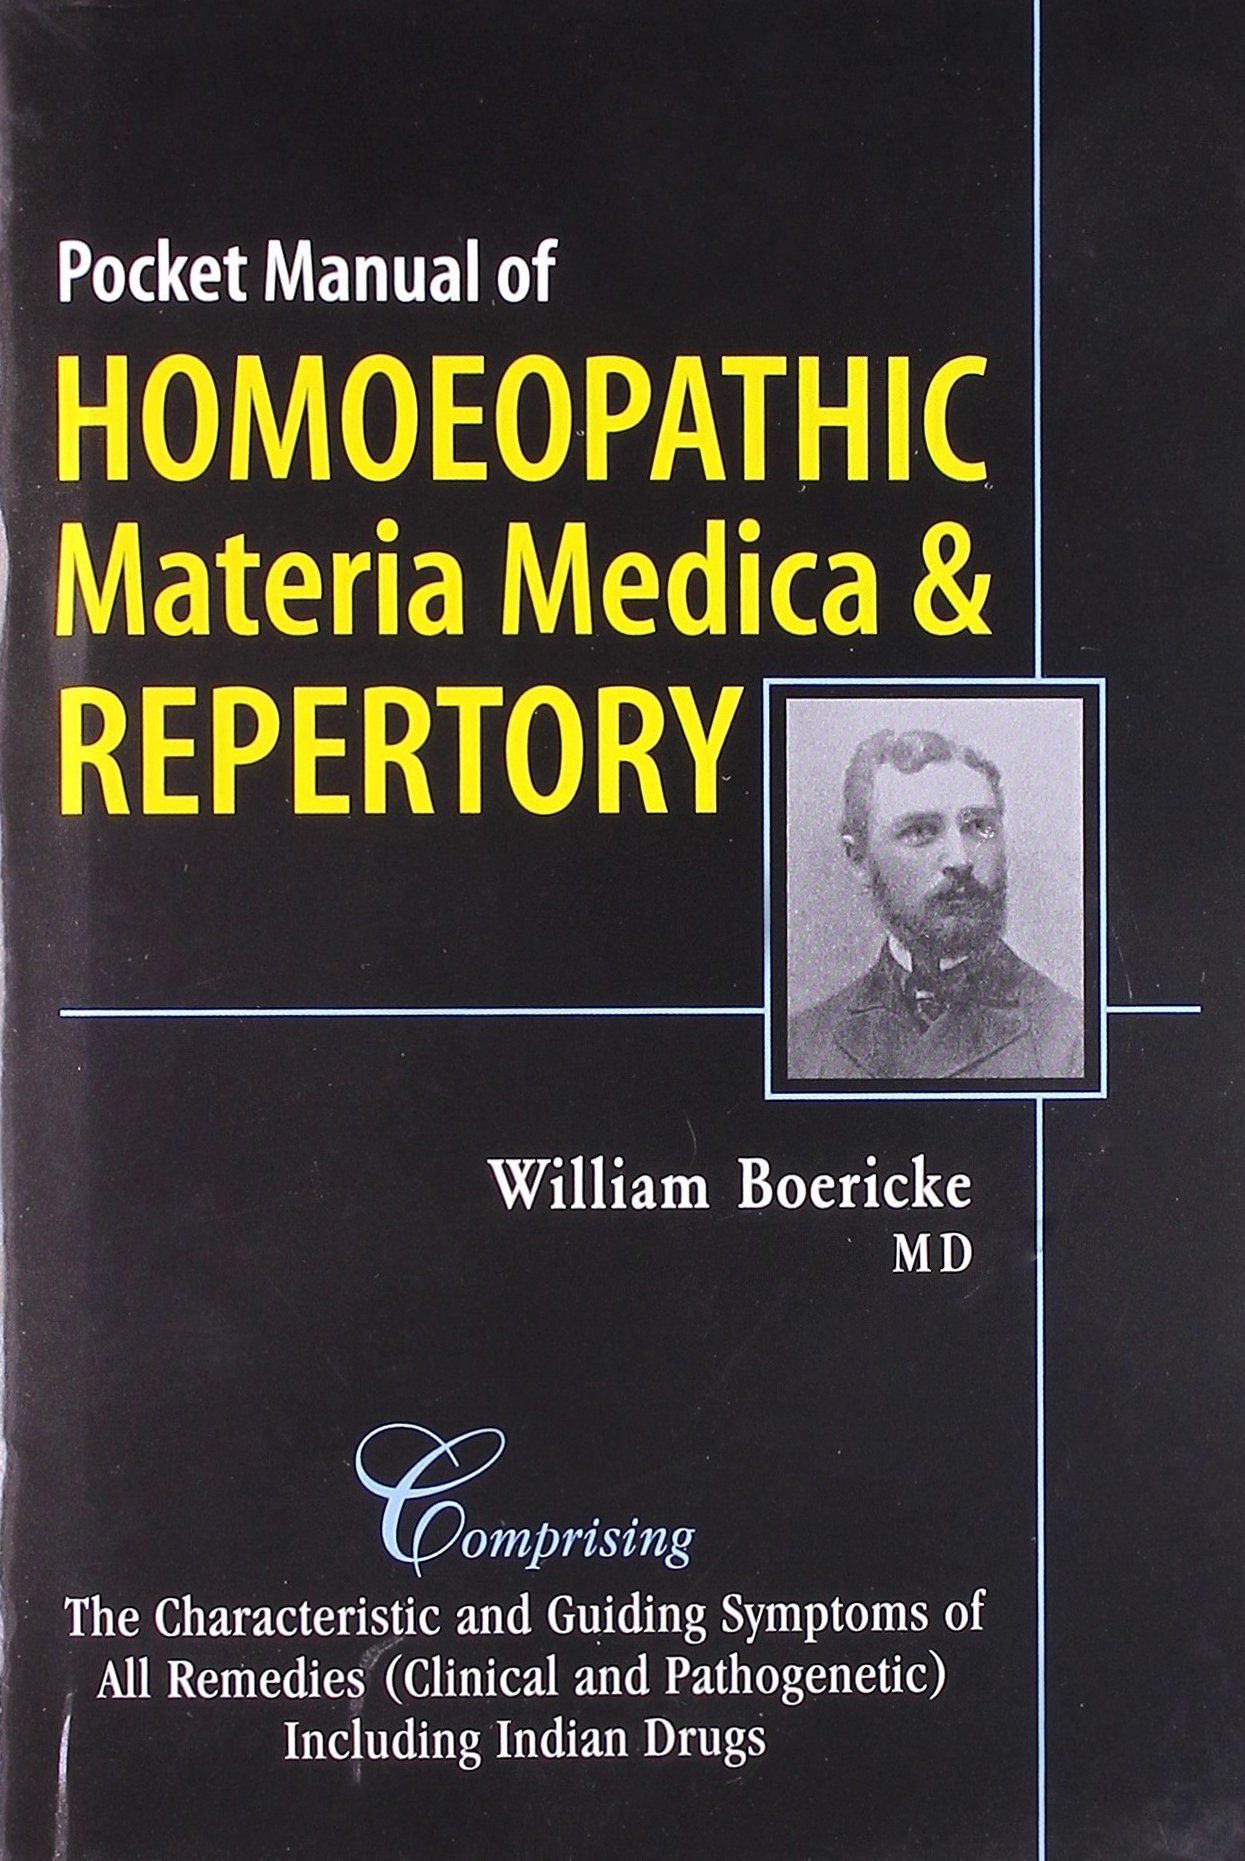 homeopathic repertory software